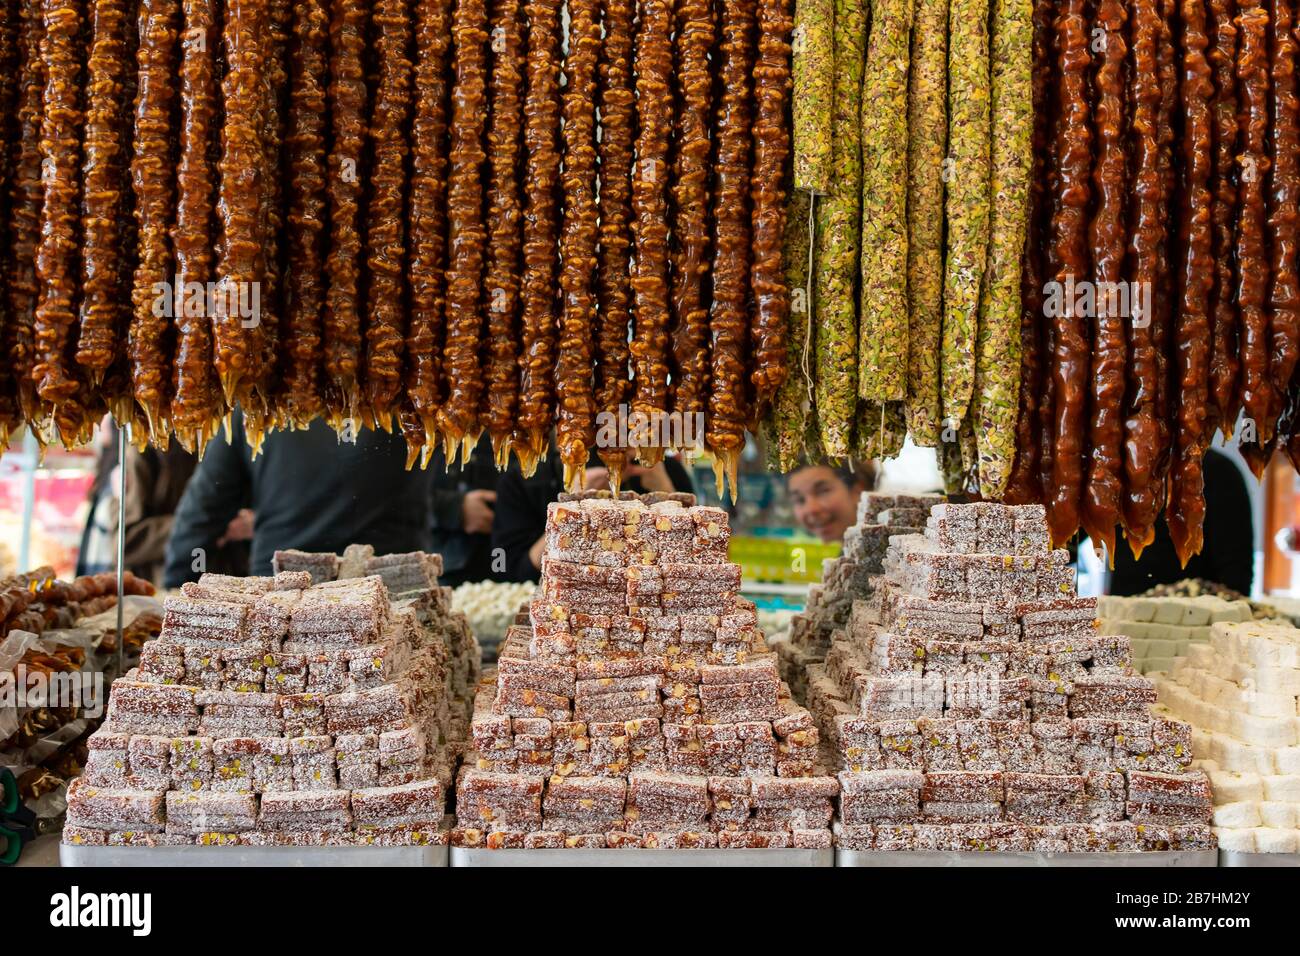 Background of sweet dry fruits in vertical bars with piles of turkish delicacies below Stock Photo